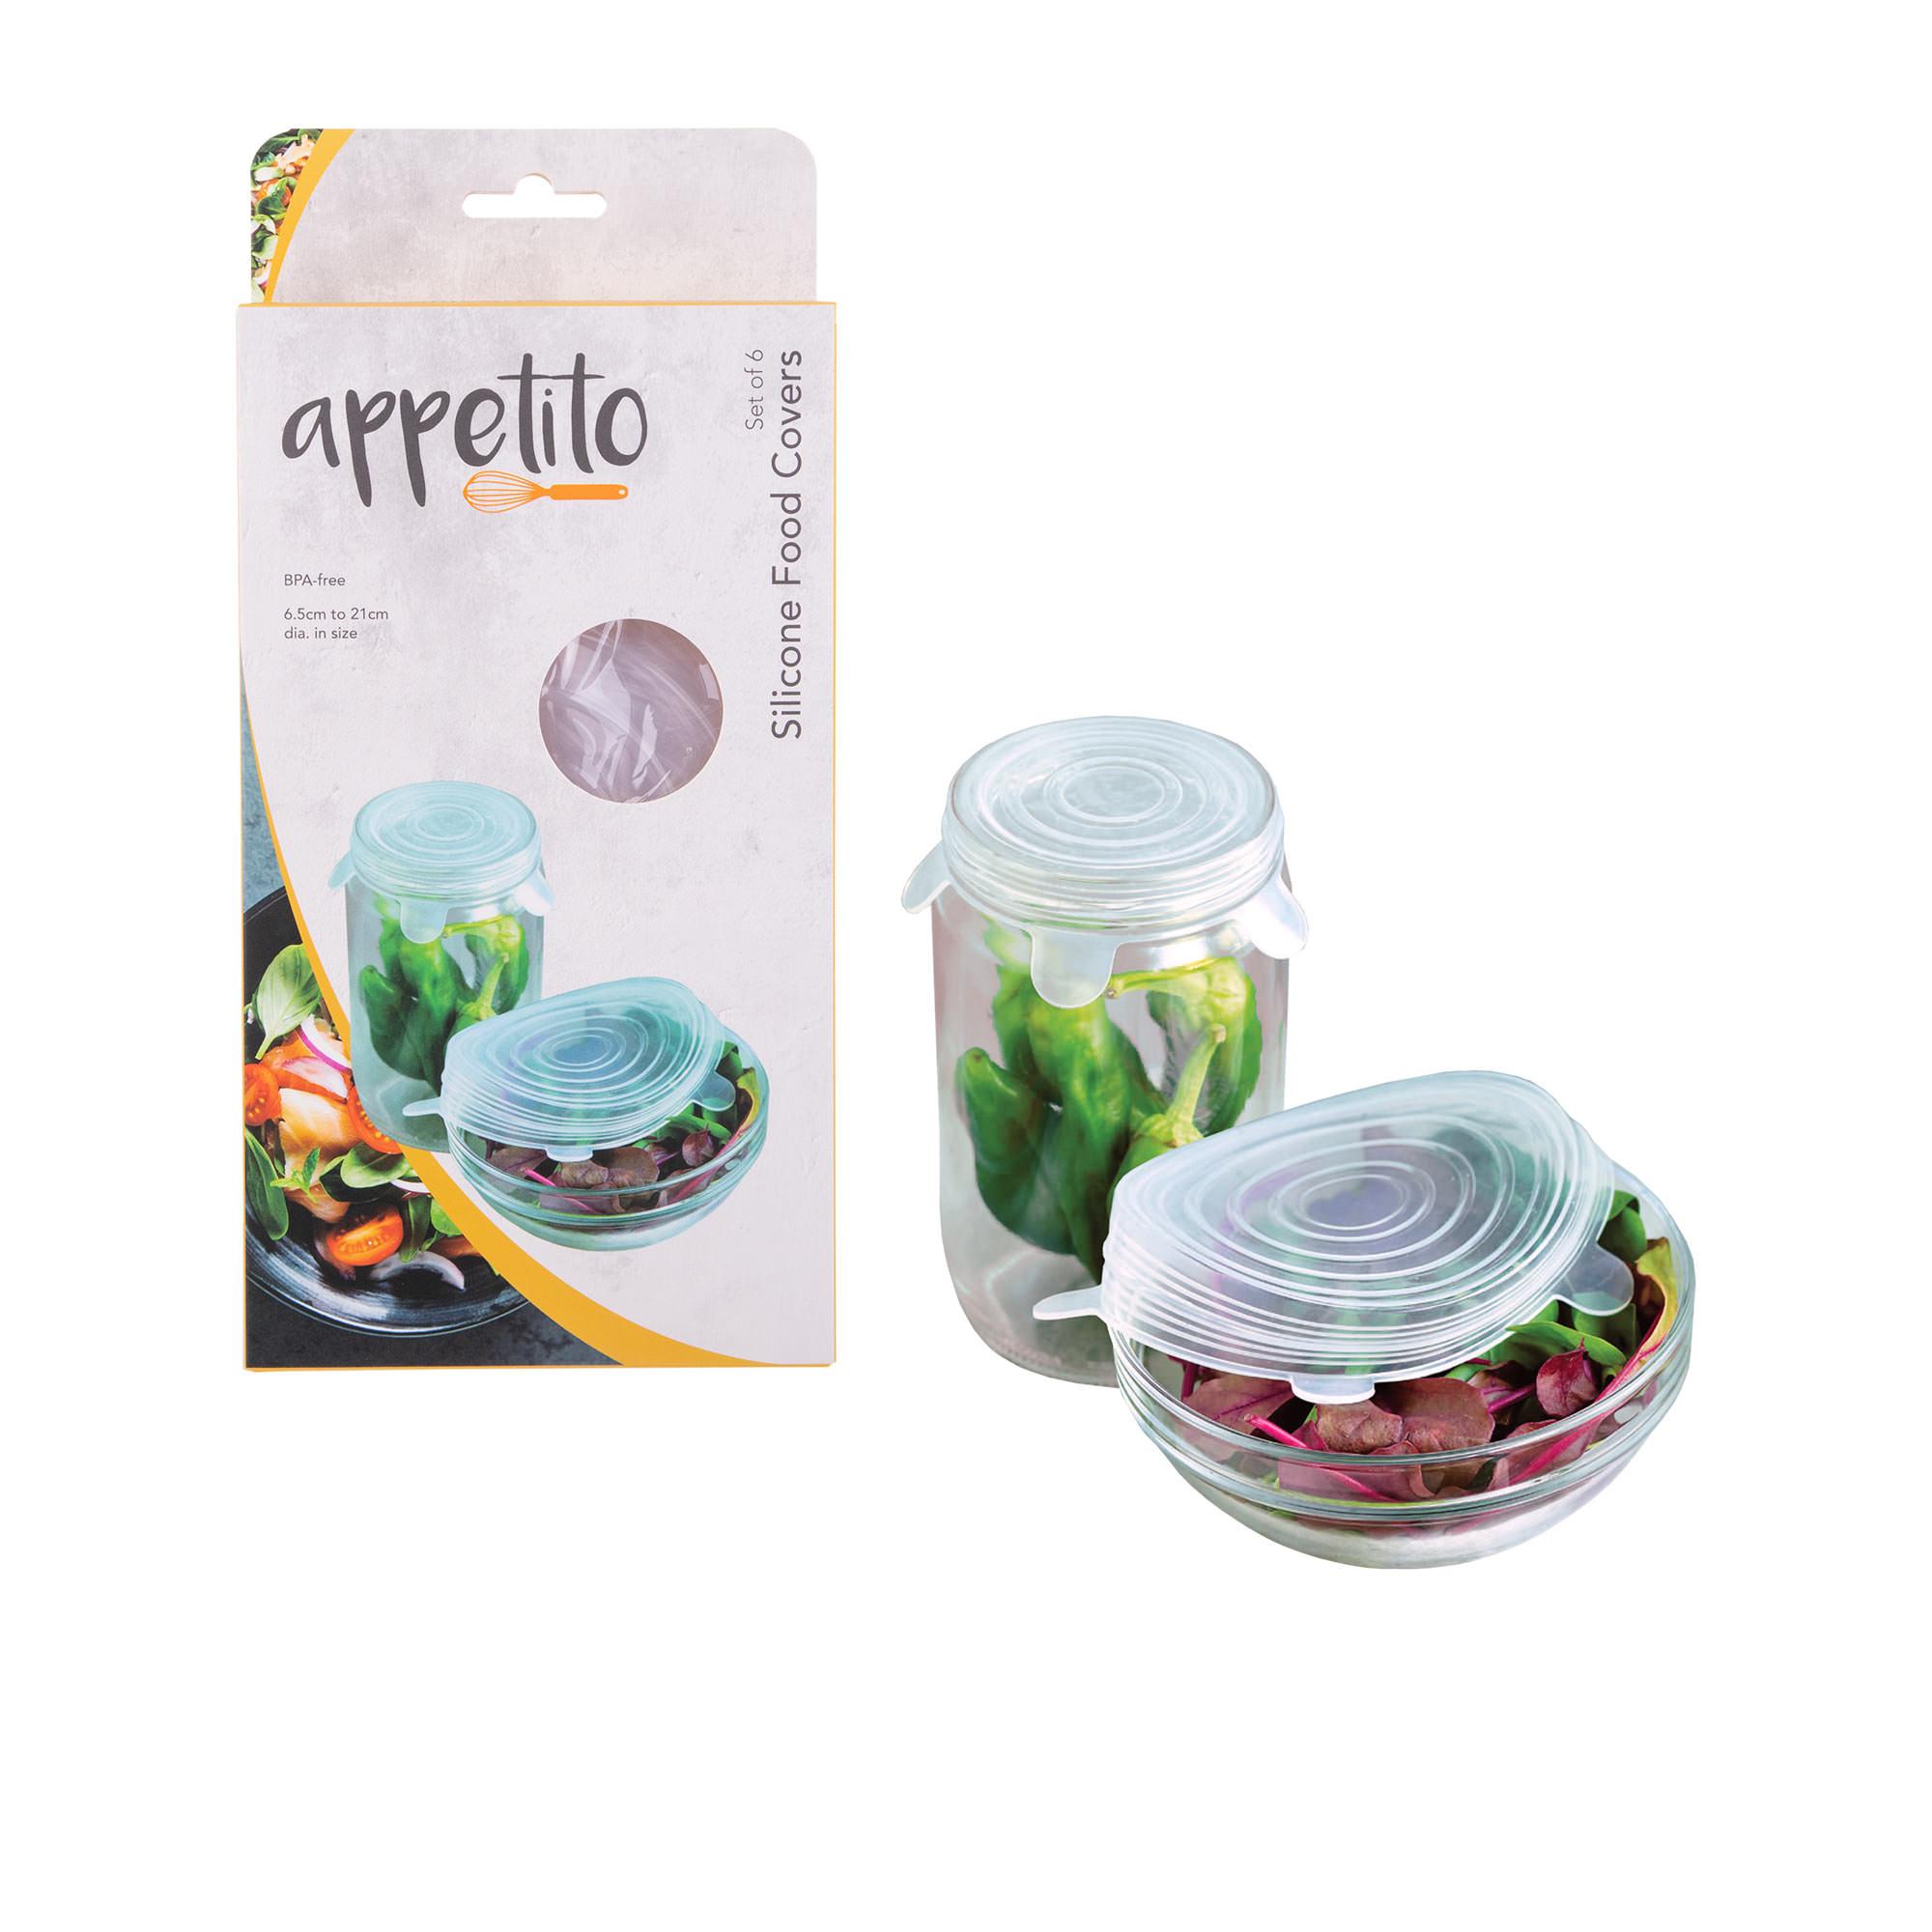 Appetito Reusable Silicone Food Cover Set of 6 Image 3